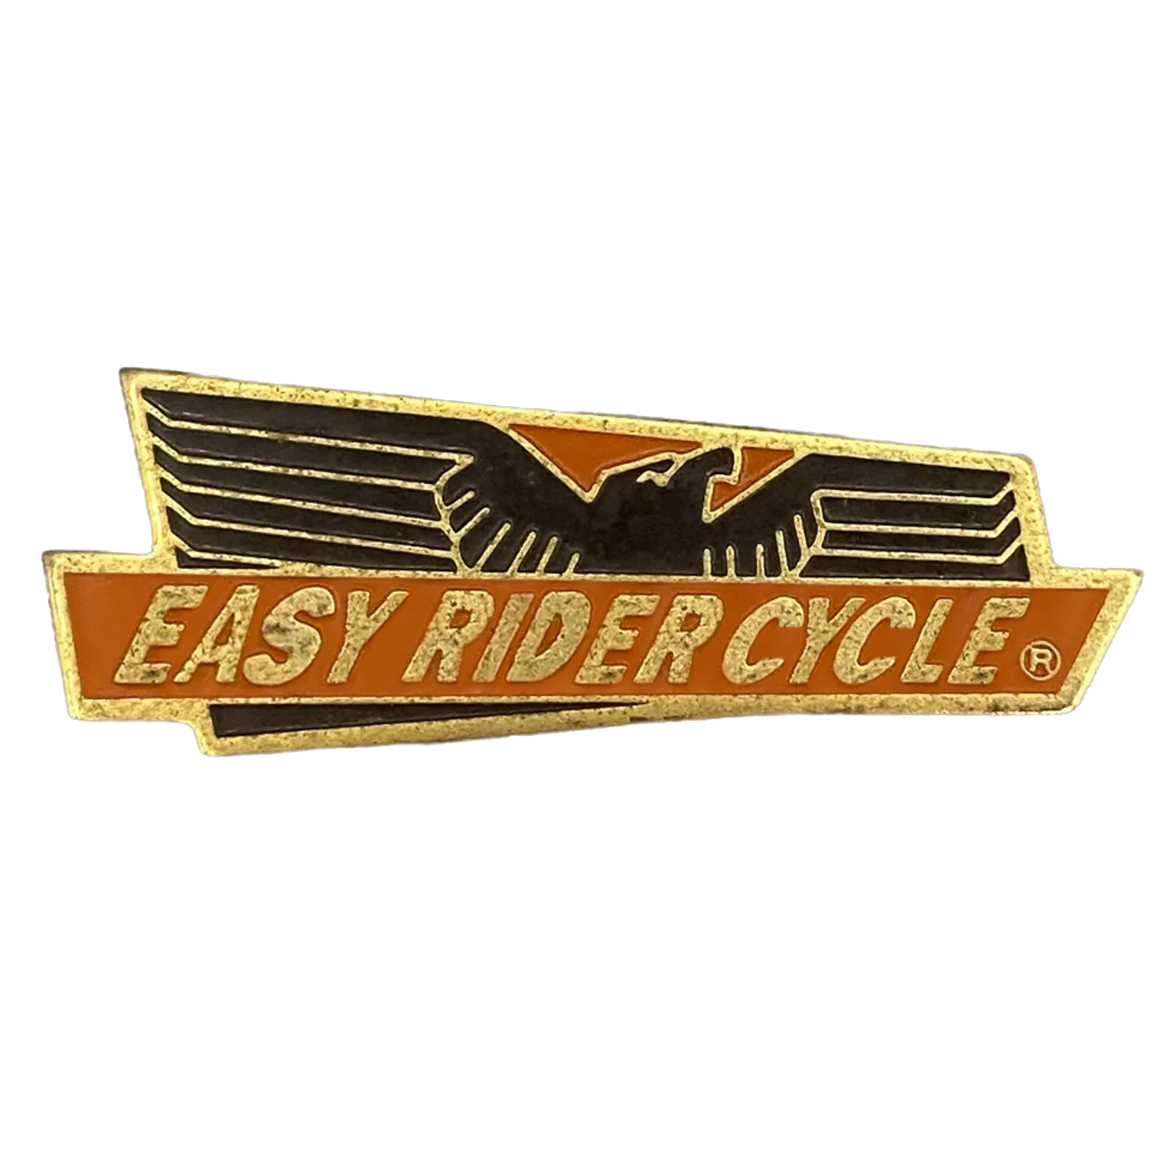 Easy Rider Cycle